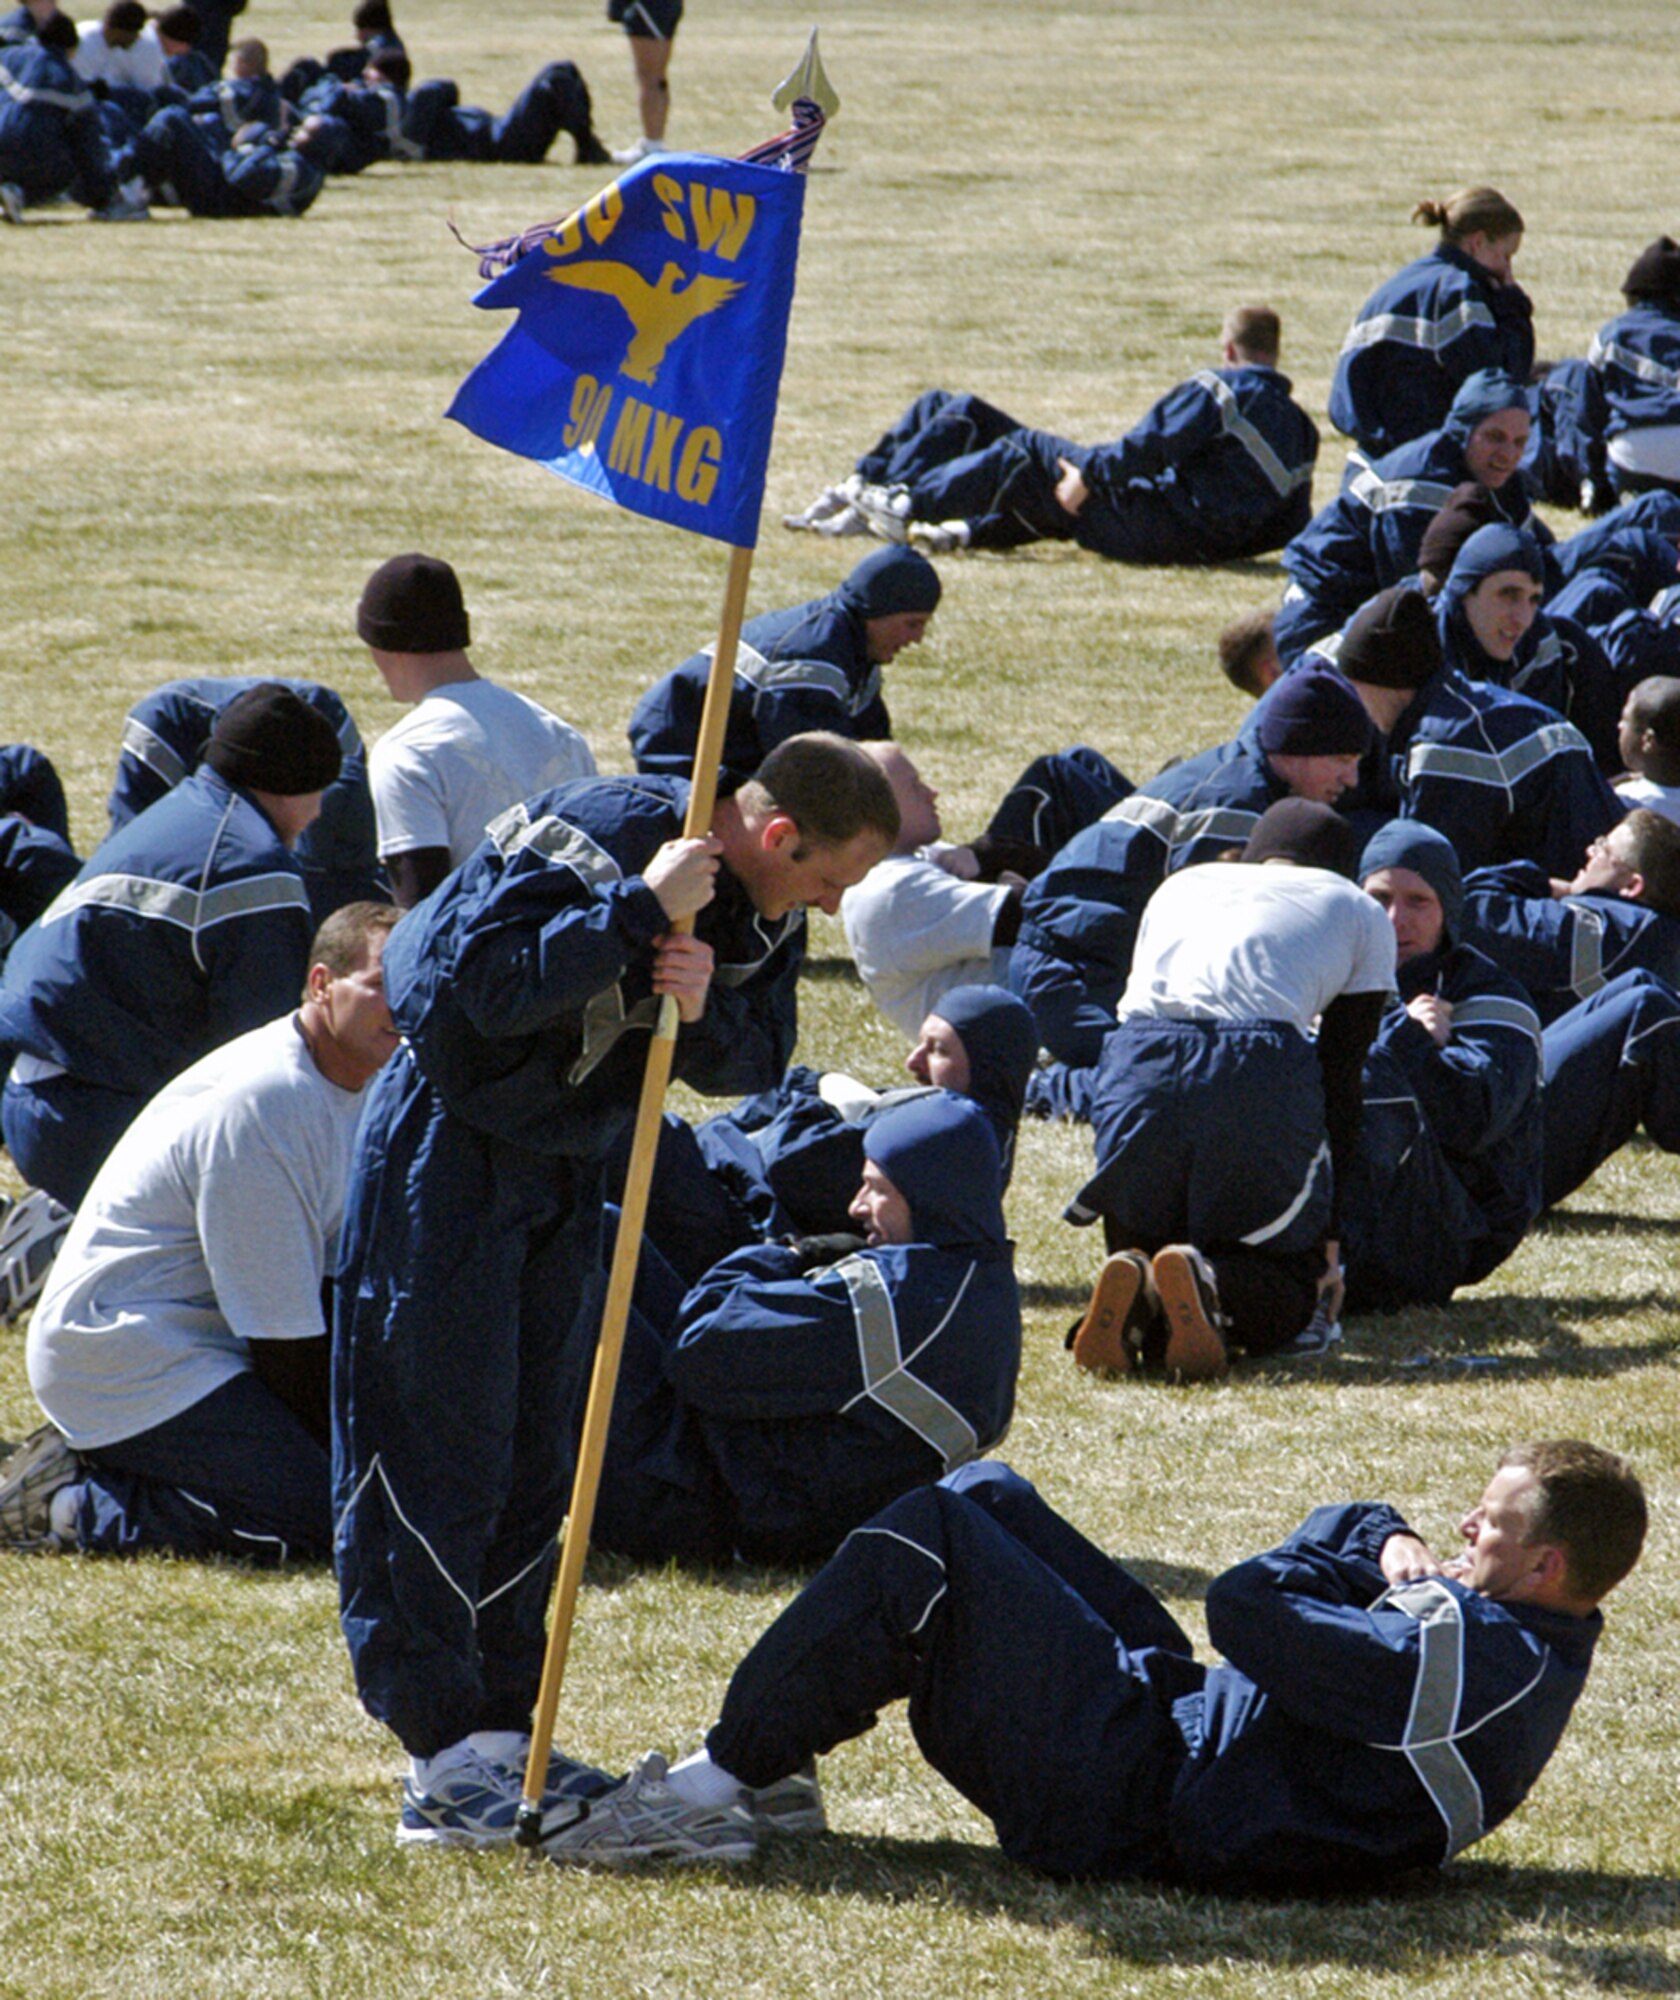 Members of the 90th Maintenance Group help each other during the calisthenics phase of the wing run April 11. Participants ran through a variety of weather challenges including cool temperatures to start, warm temperatures towards the end and gusty winds that helped encourage runners to finish faster (Photo by Staff Sgt. Kurt Arkenberg).